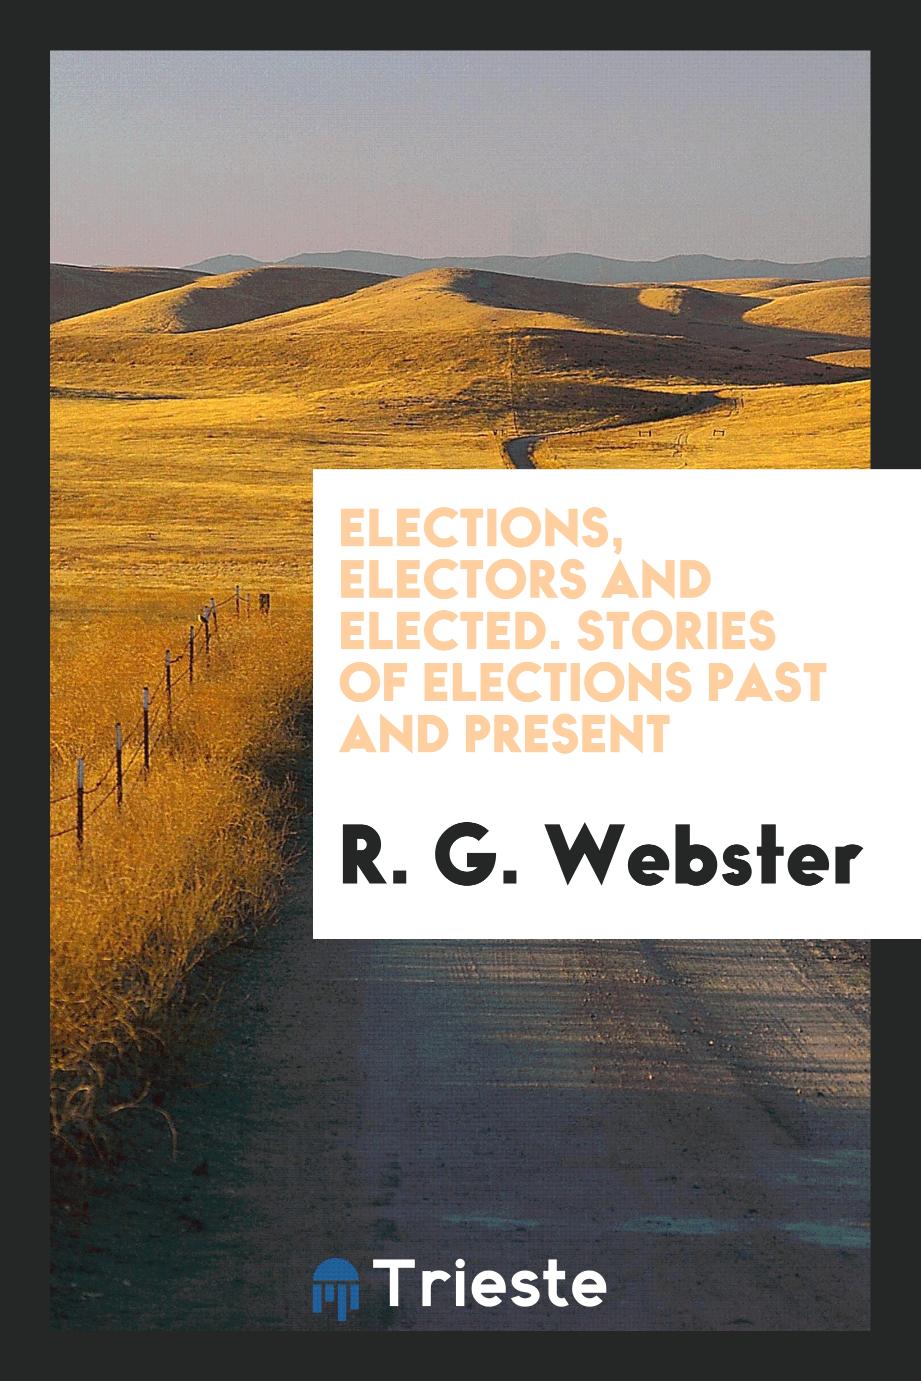 R. G. Webster - Elections, Electors and Elected. Stories of Elections Past and Present